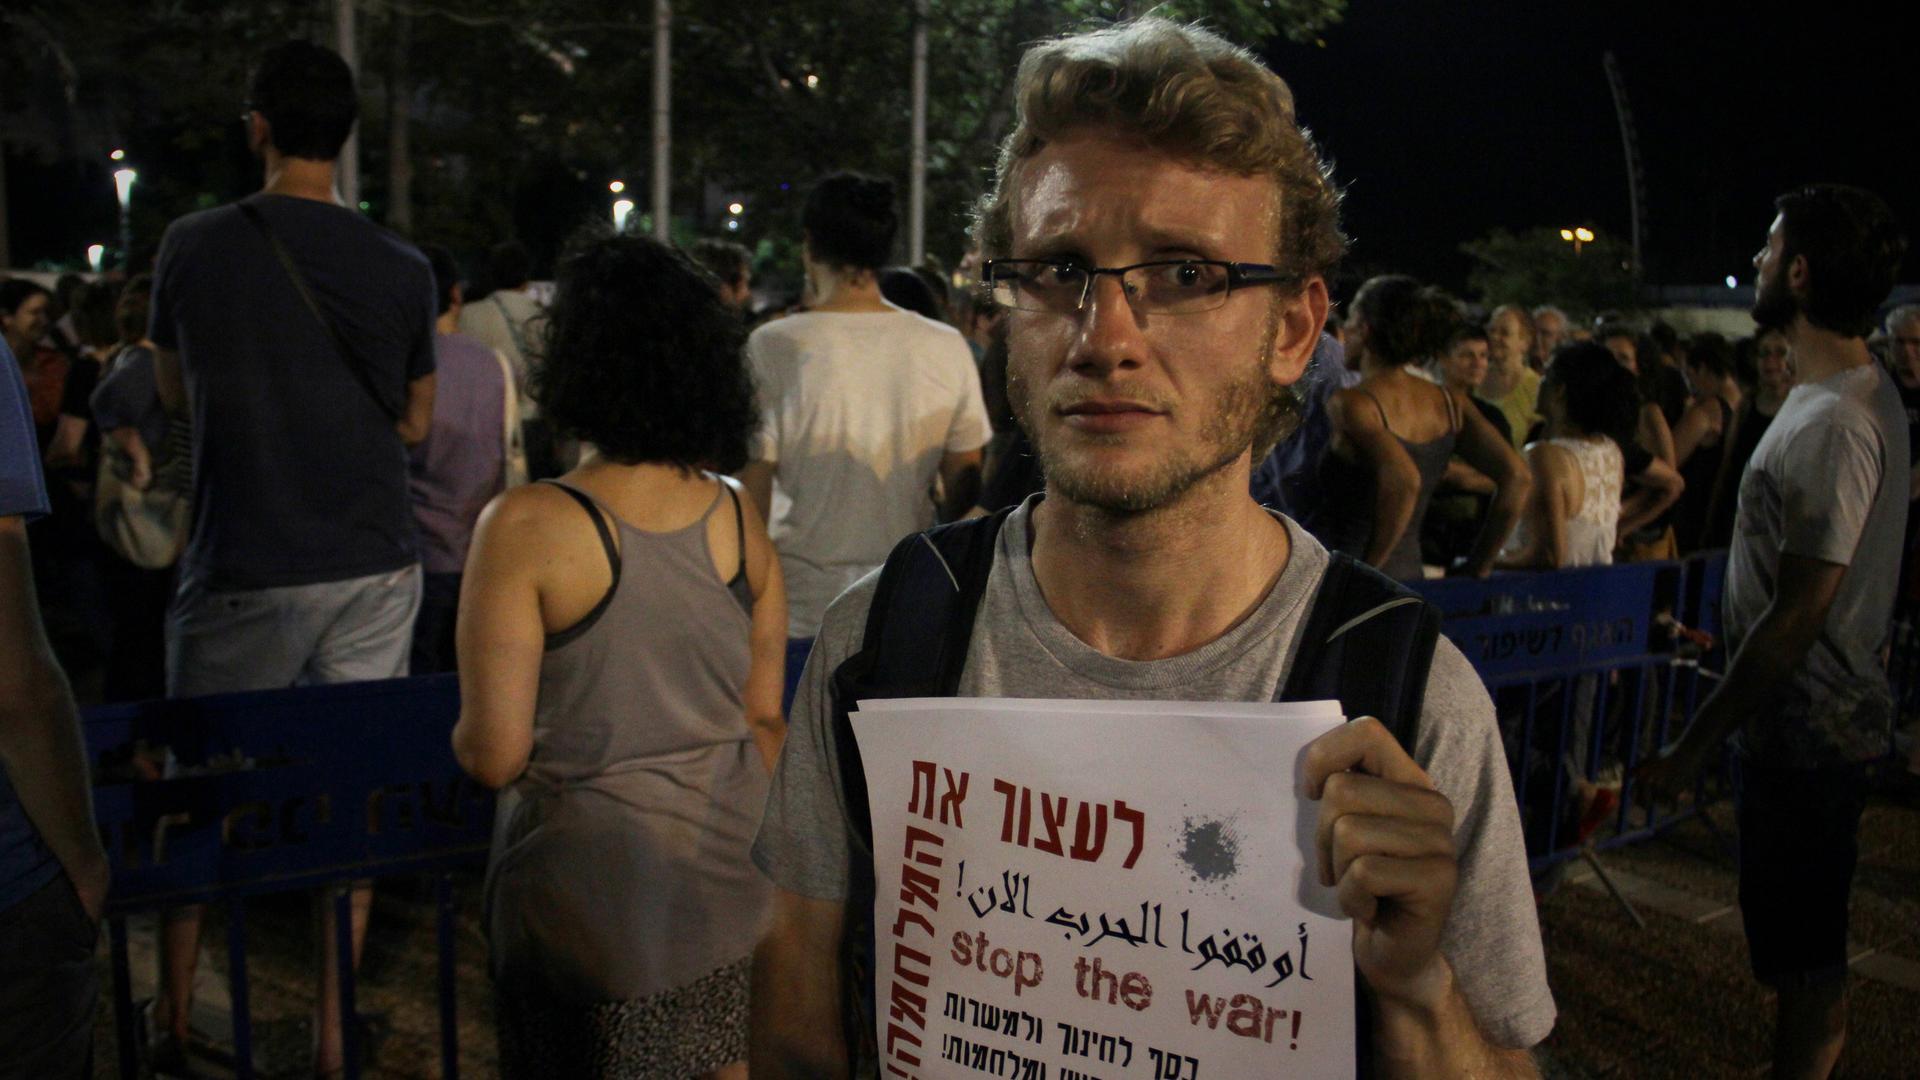 Israeli Yasha Marmer protests against his country’s operation in the Gaza Strip, holding a poster that says “stop the war” in Hebrew, Arabic and English.